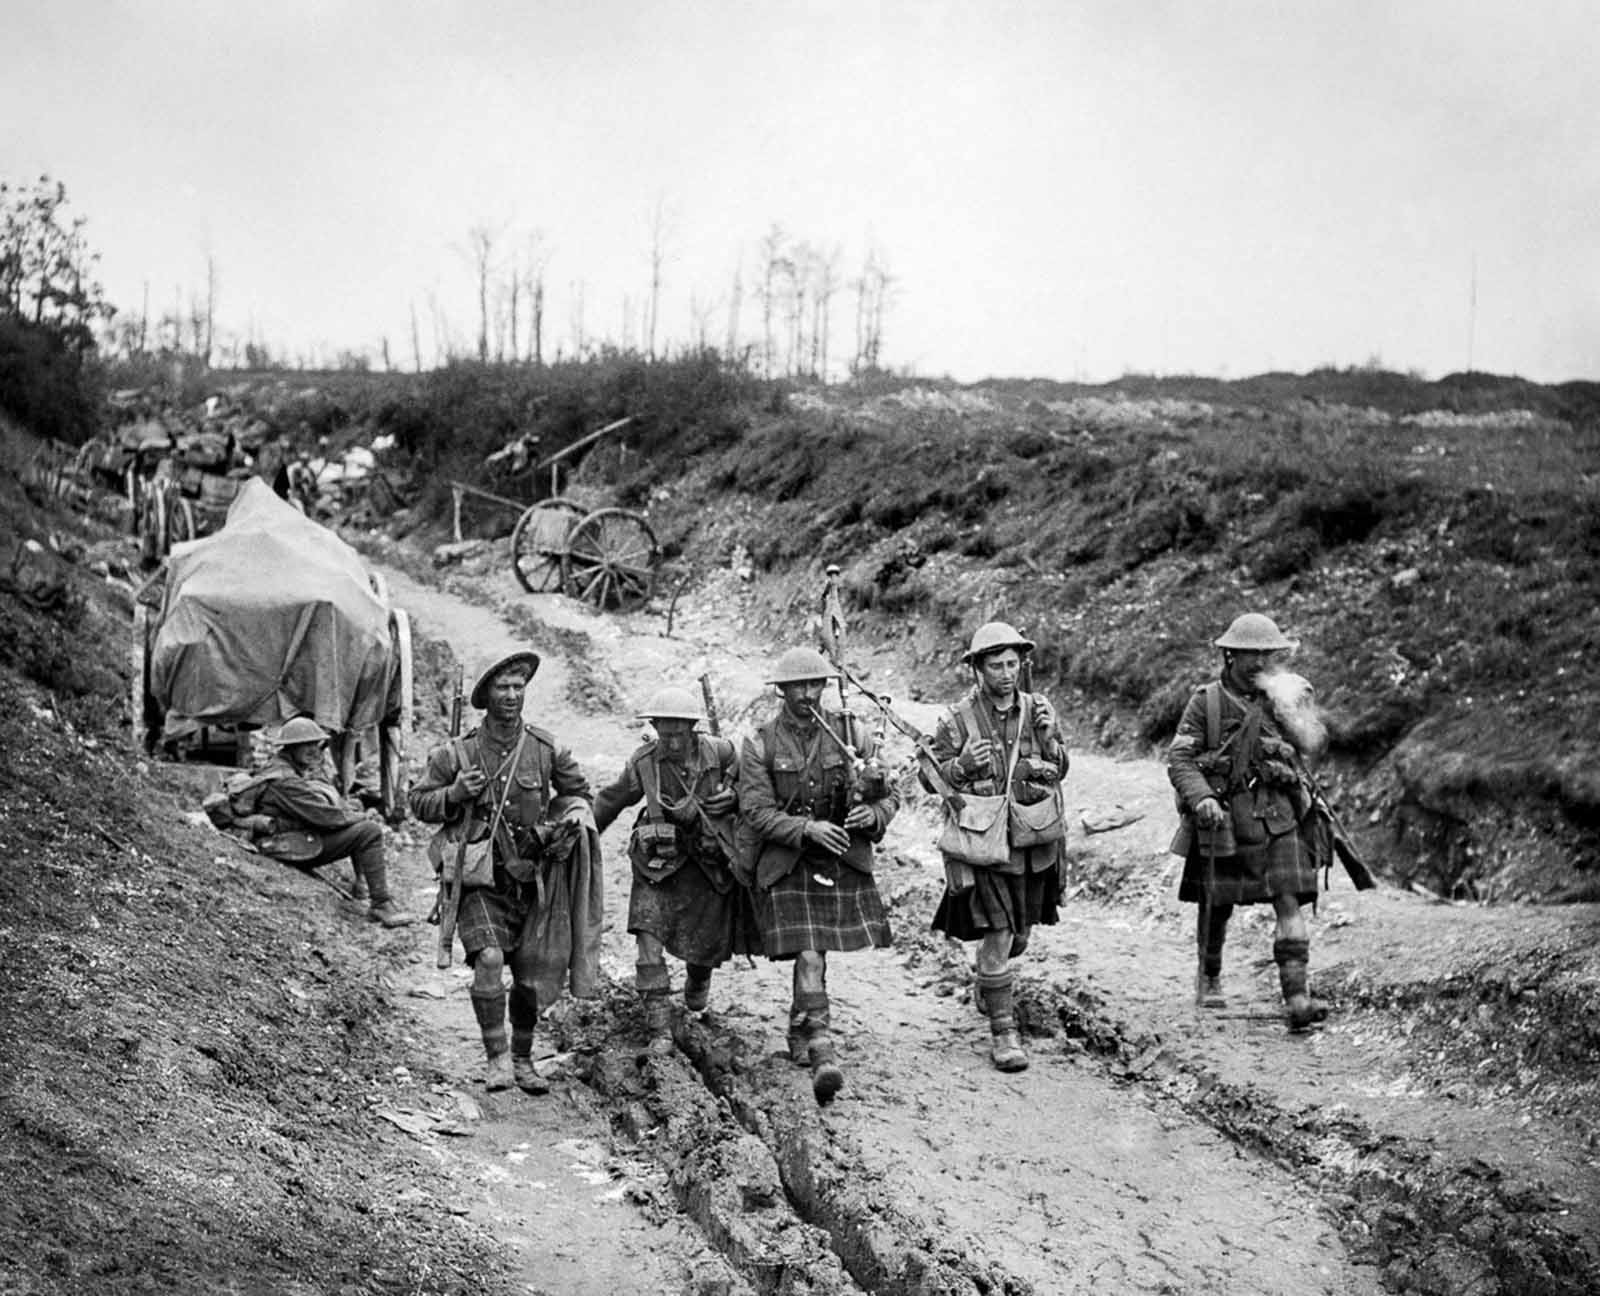 A piper of the 7th Seaforth Highlanders leads four men of the 26th Brigade back from the trenches after the attack on Longueval. July 14, 1916.